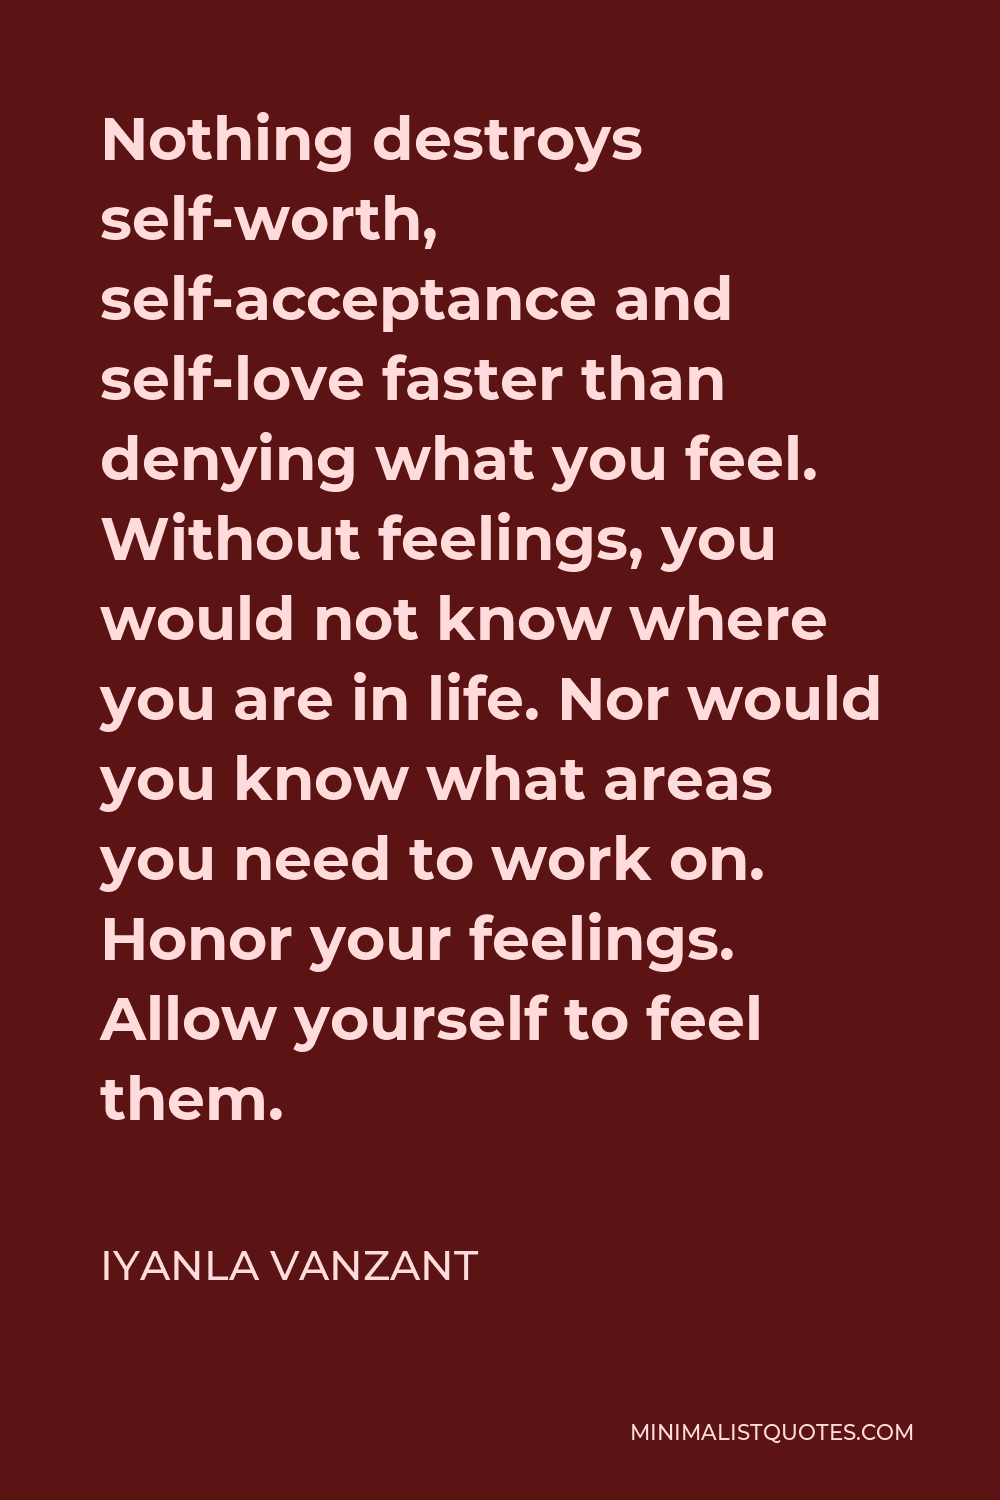 Iyanla Vanzant Quote - Nothing destroys self-worth, self-acceptance and self-love faster than denying what you feel. Without feelings, you would not know where you are in life. Nor would you know what areas you need to work on. Honor your feelings. Allow yourself to feel them.